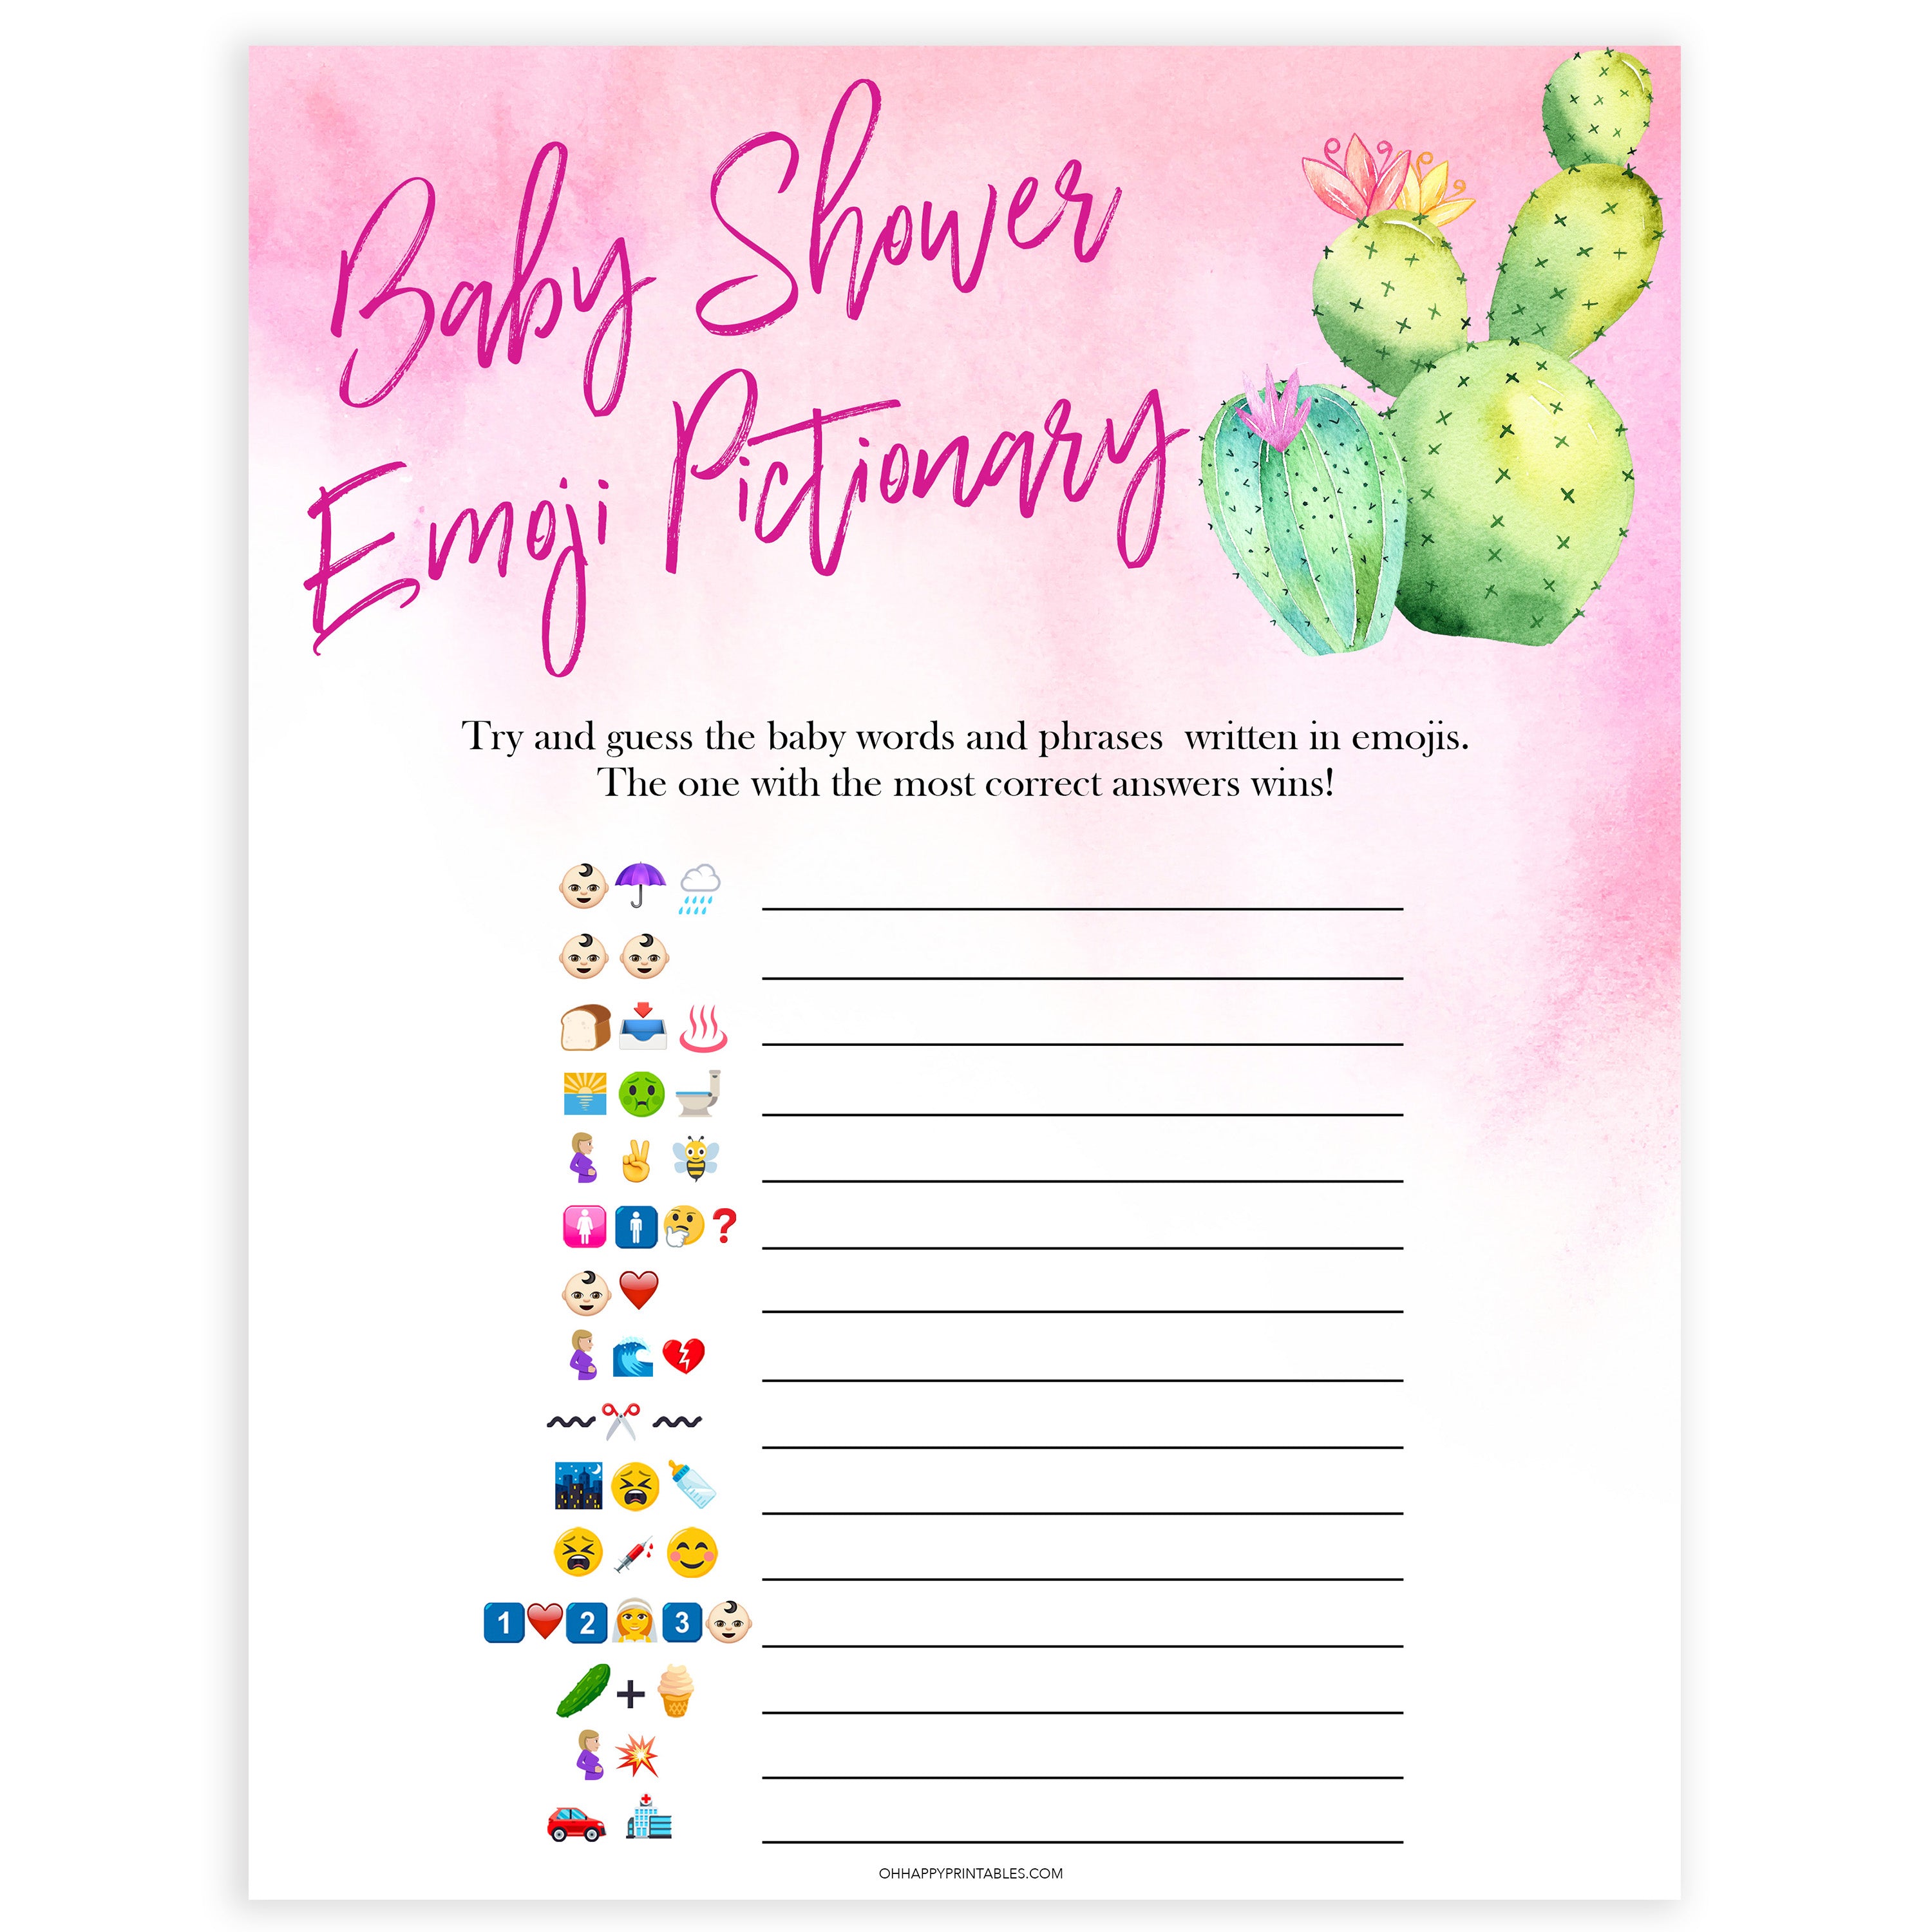 Cactus baby shower games, cactus emoji pictionary baby game, printable baby games, Mexican baby shower, Mexican baby games, fiesta baby games, popular baby games, printable baby games